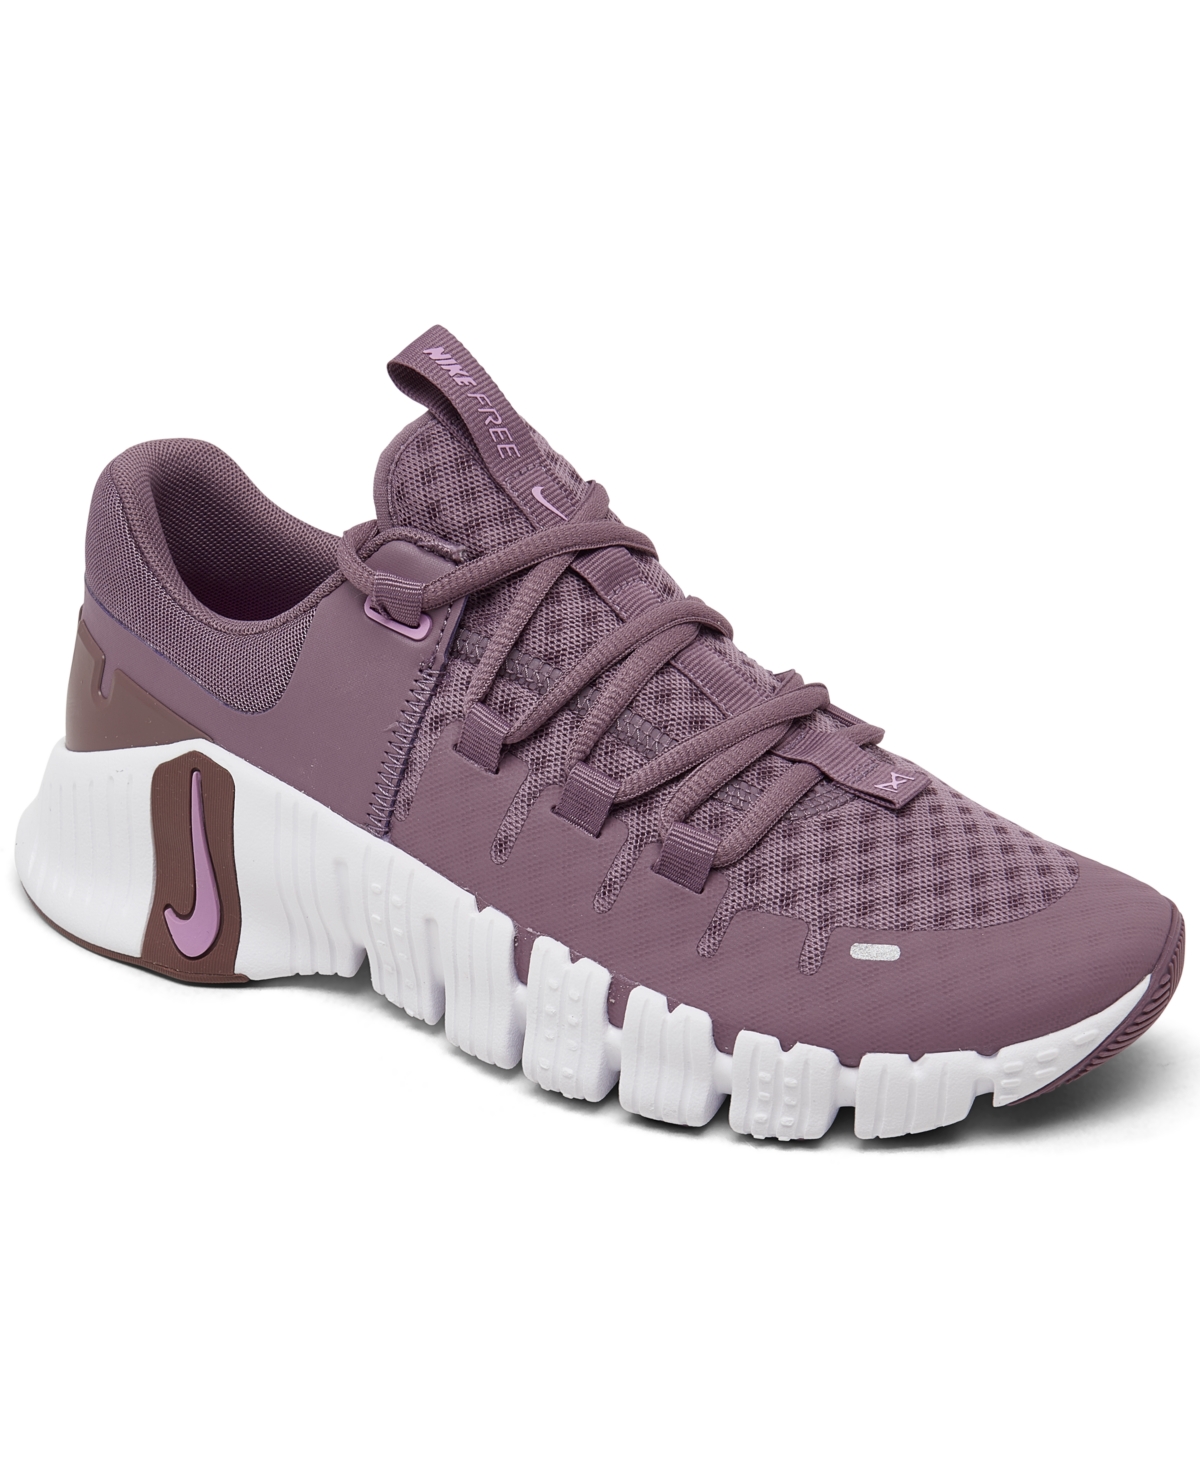 NIKE WOMEN'S FREE METCON 5 TRAINING SNEAKERS FROM FINISH LINE